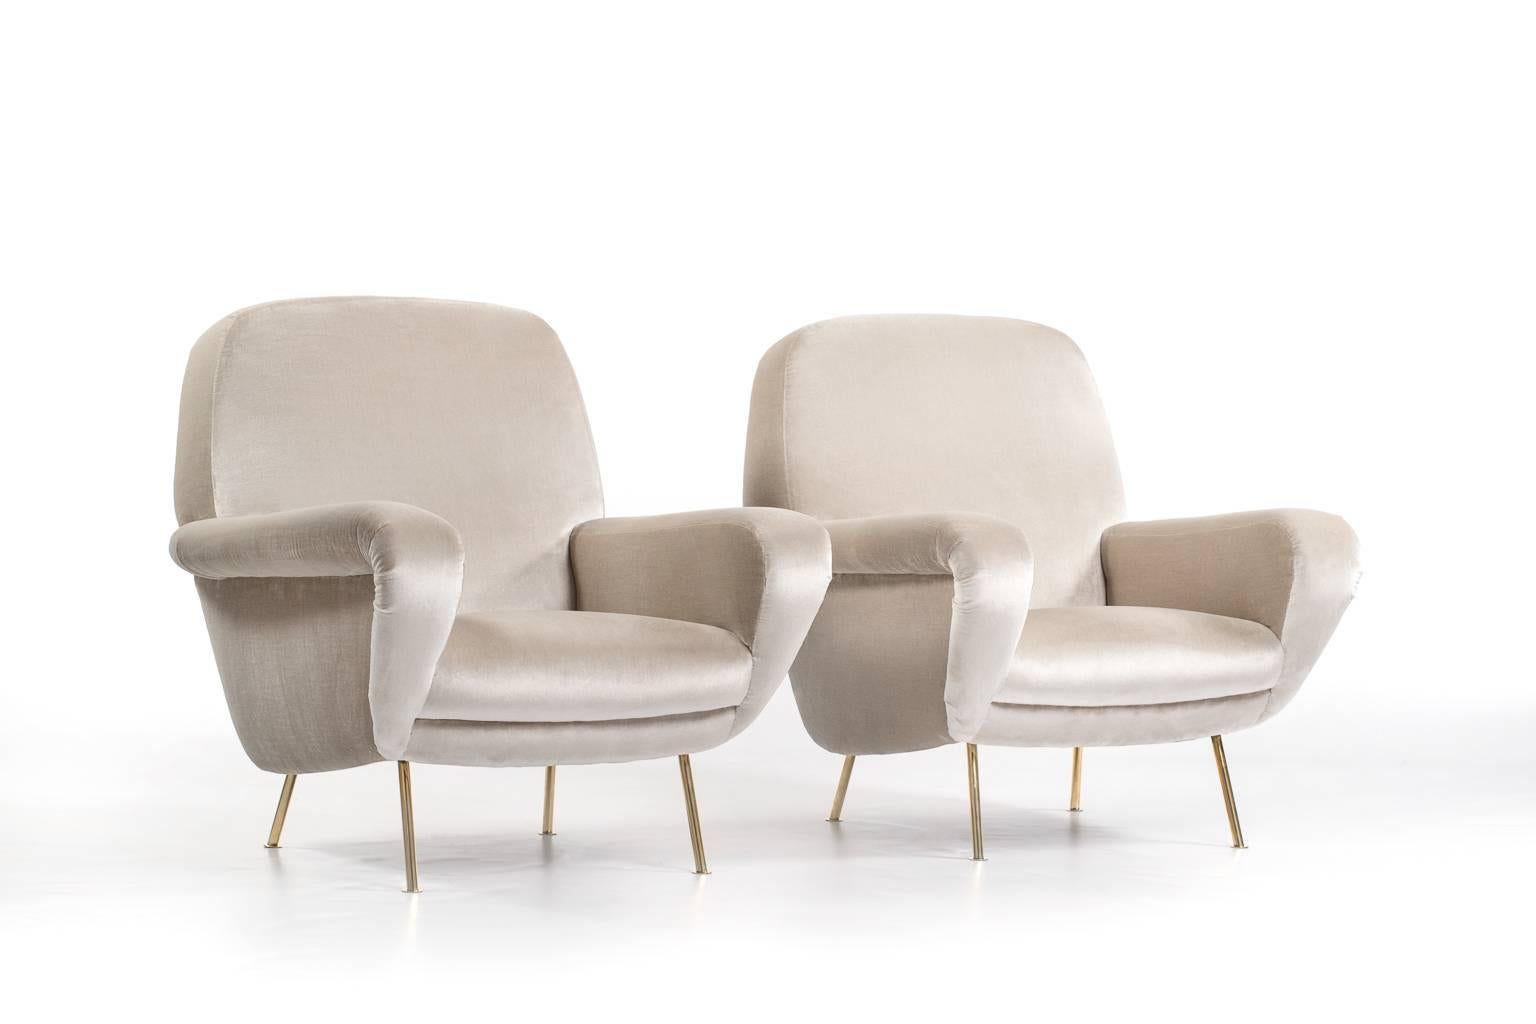 Exclusive set of lounge chairs model ‘830’ by Gianfranco Frattini for Cassina, Italy, 1954. Beautiful elegant design on chic brass legs. Early 1950s edition reupholstered with a high quality champagne colored velvet which provides a very chic and